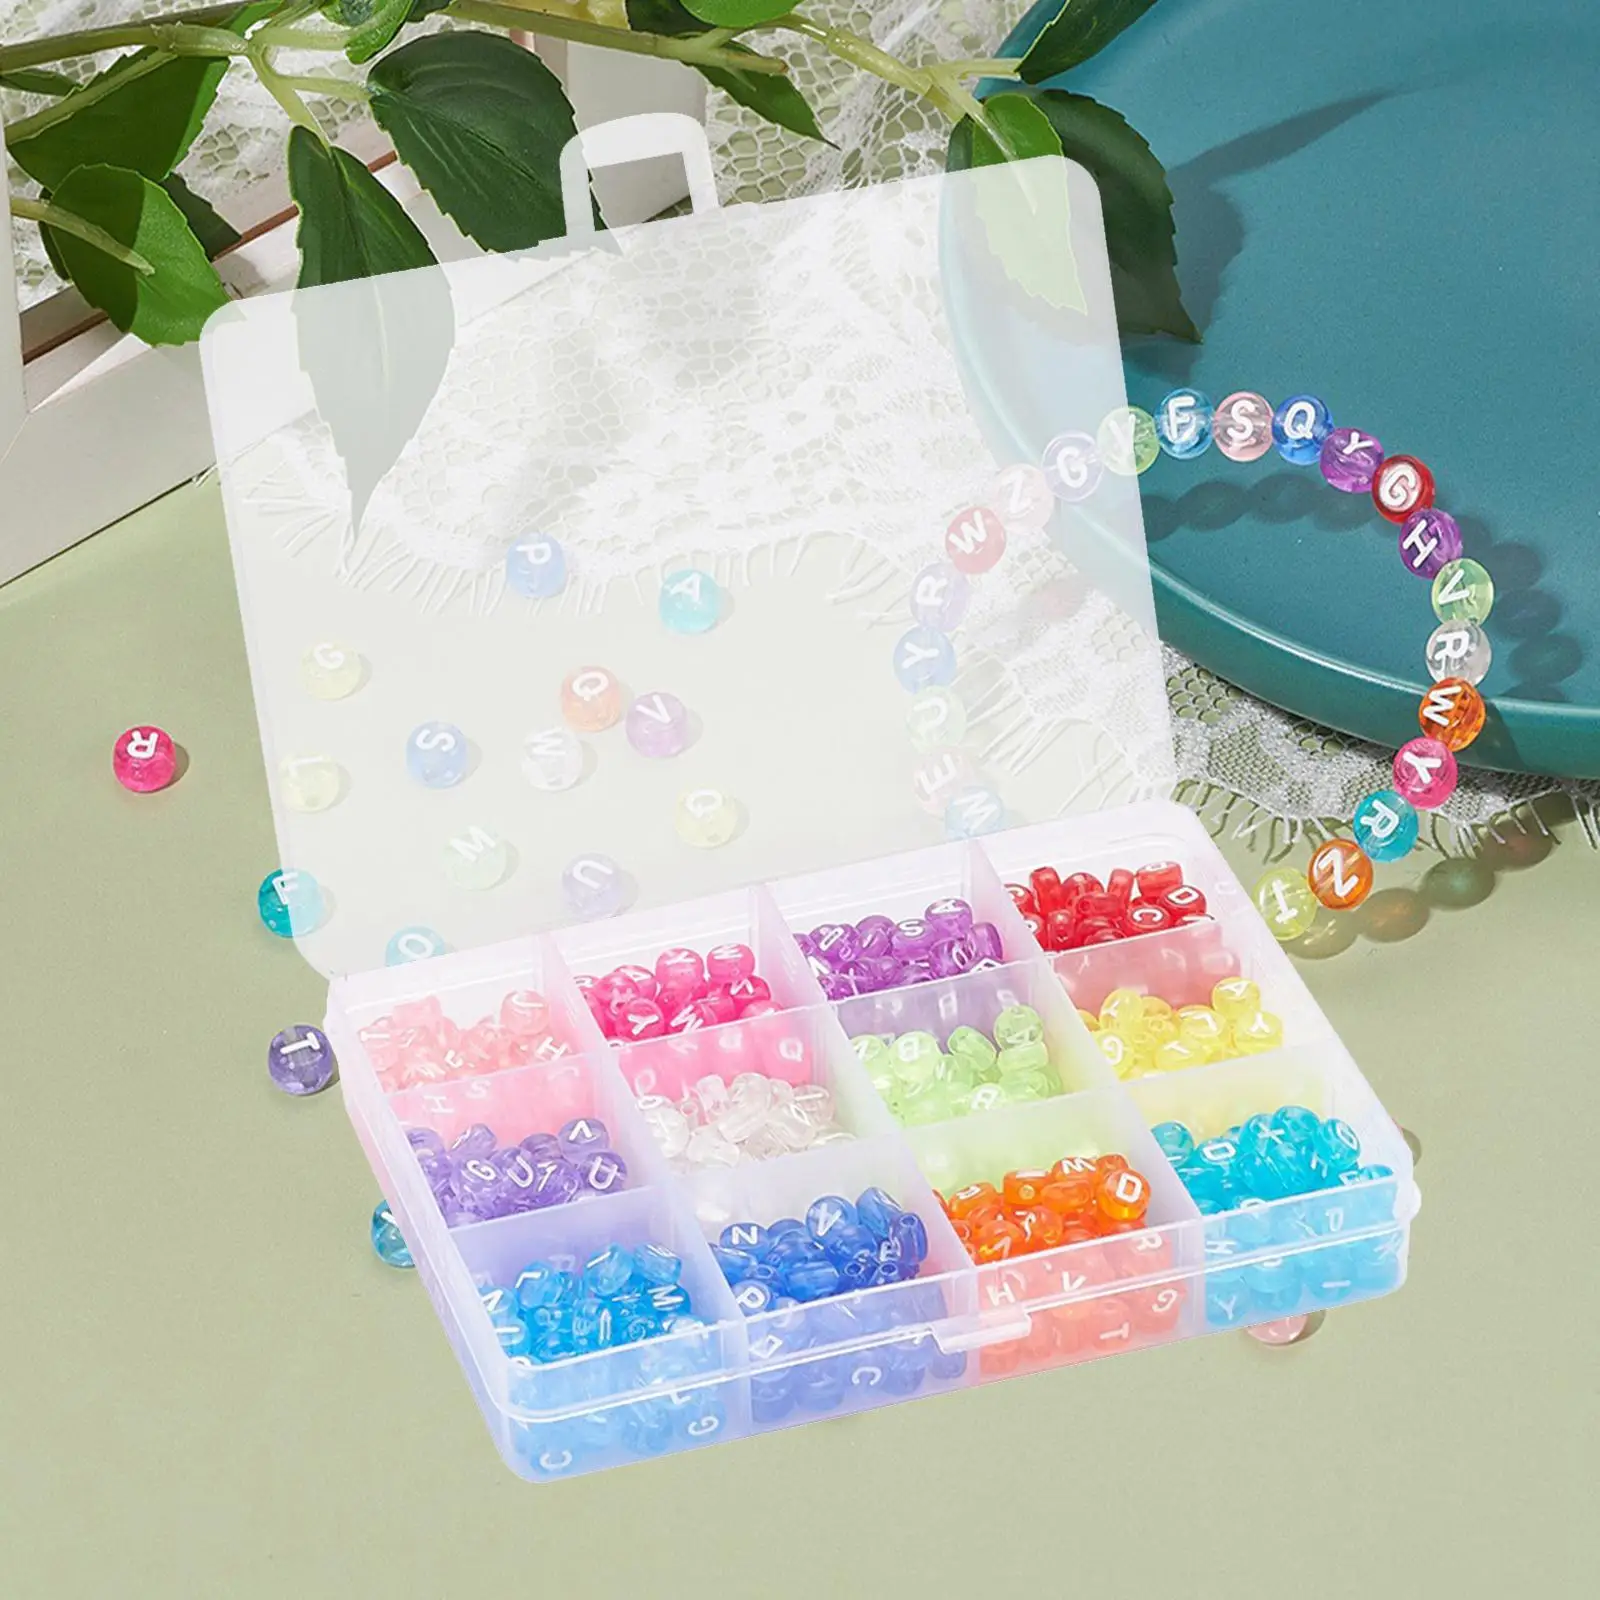 600x Acrylic Alphabet Letter Beads DIY for Jewelry Making Necklace Bracelets